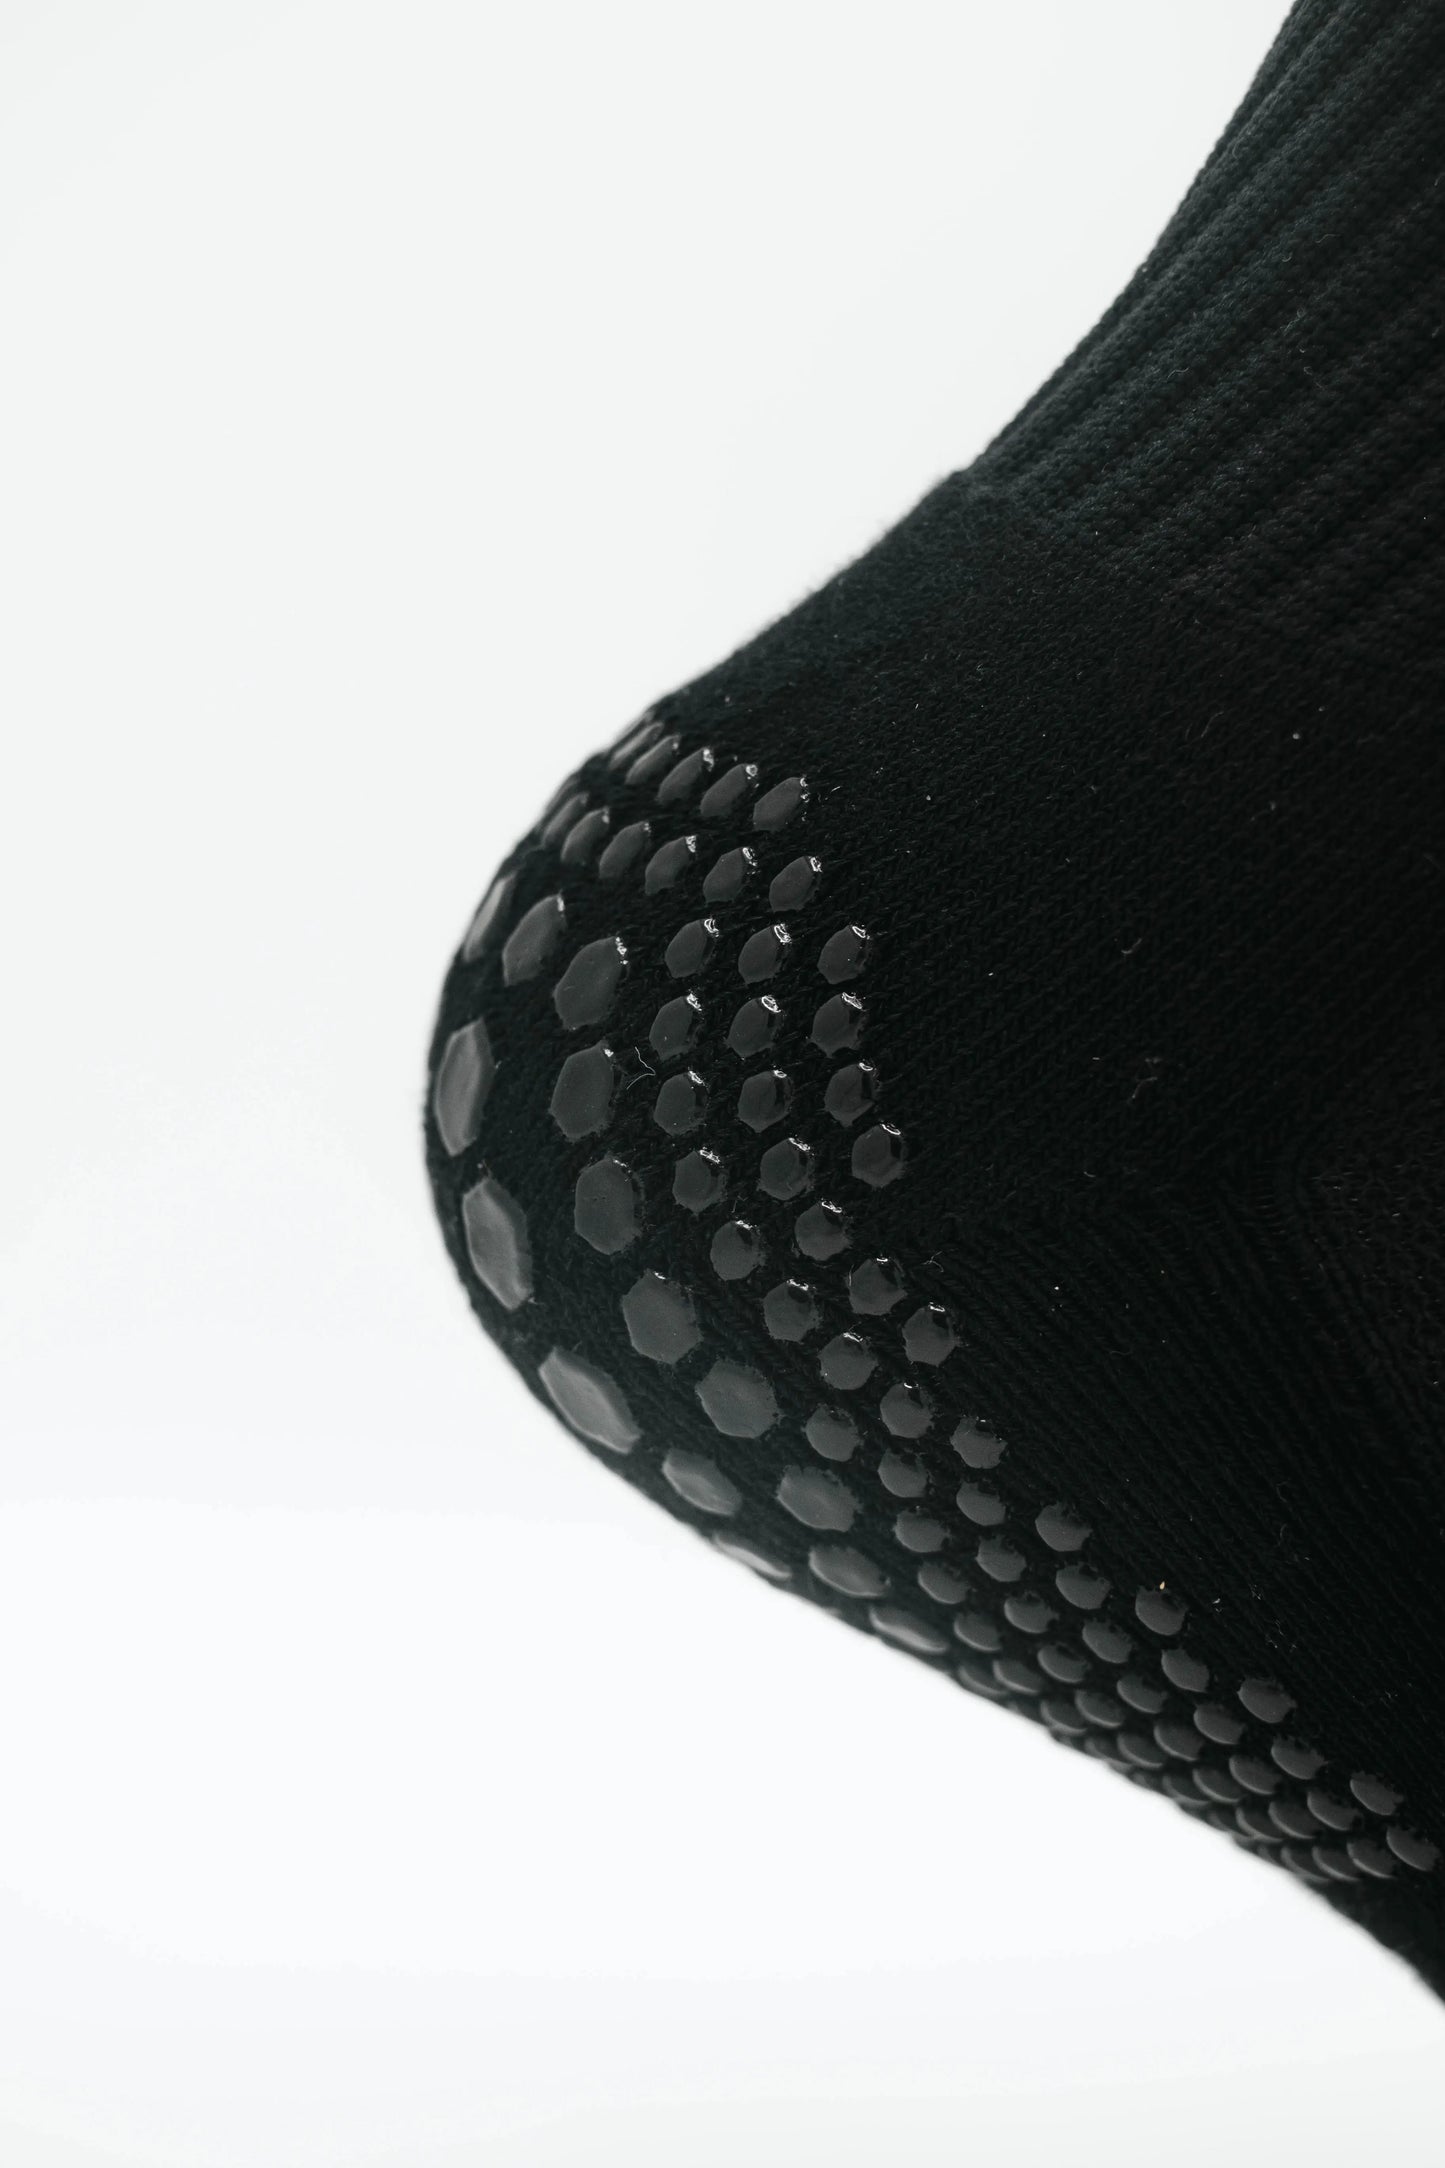 Black GT GRIP Socks Heel Close-Up, Ultra-Thin Silicone Grip for Superior Traction and Stability